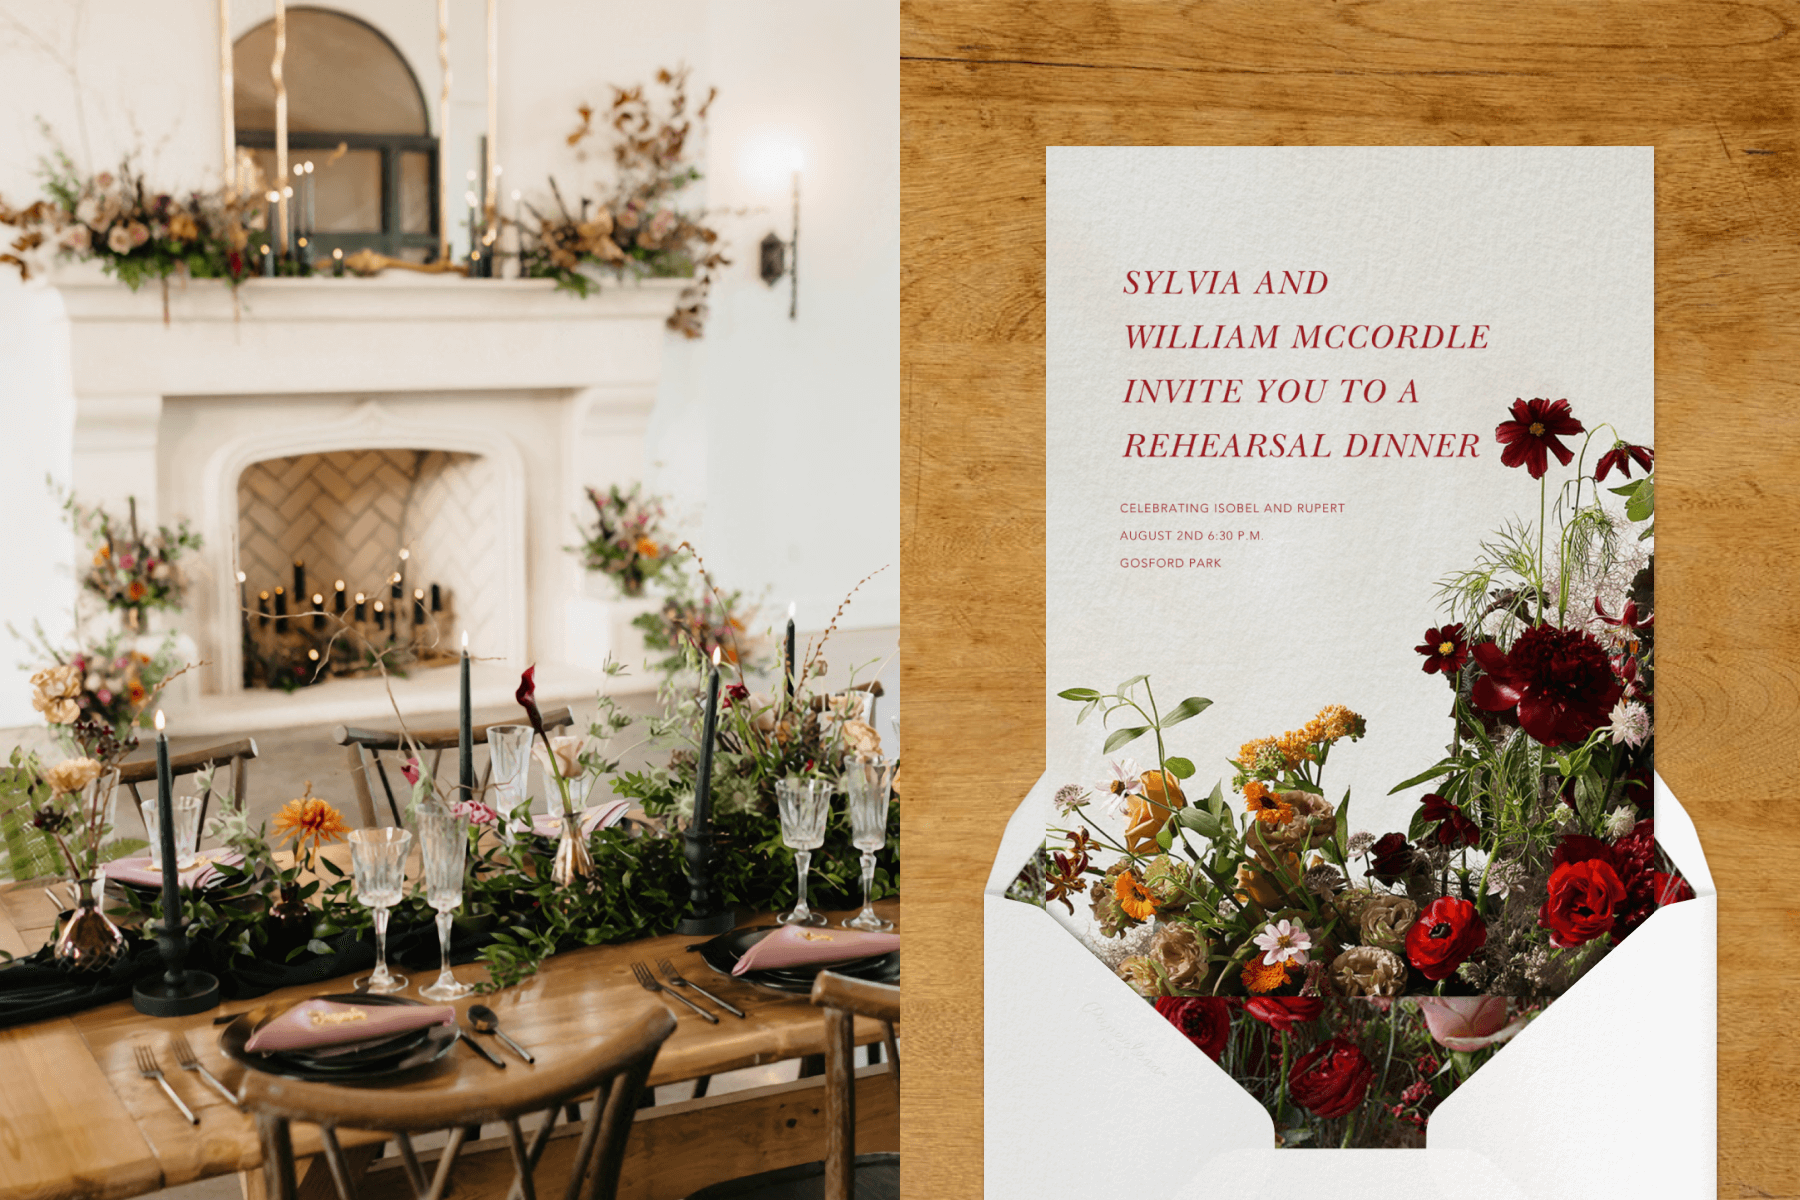 Left: A wooden banquet table is set with flowers down the center, with a white fireplace in the background and flowers on the mantle. Right: A rehearsal dinner invitation with photo-real flowers in autumnal hues rising from the bottom.